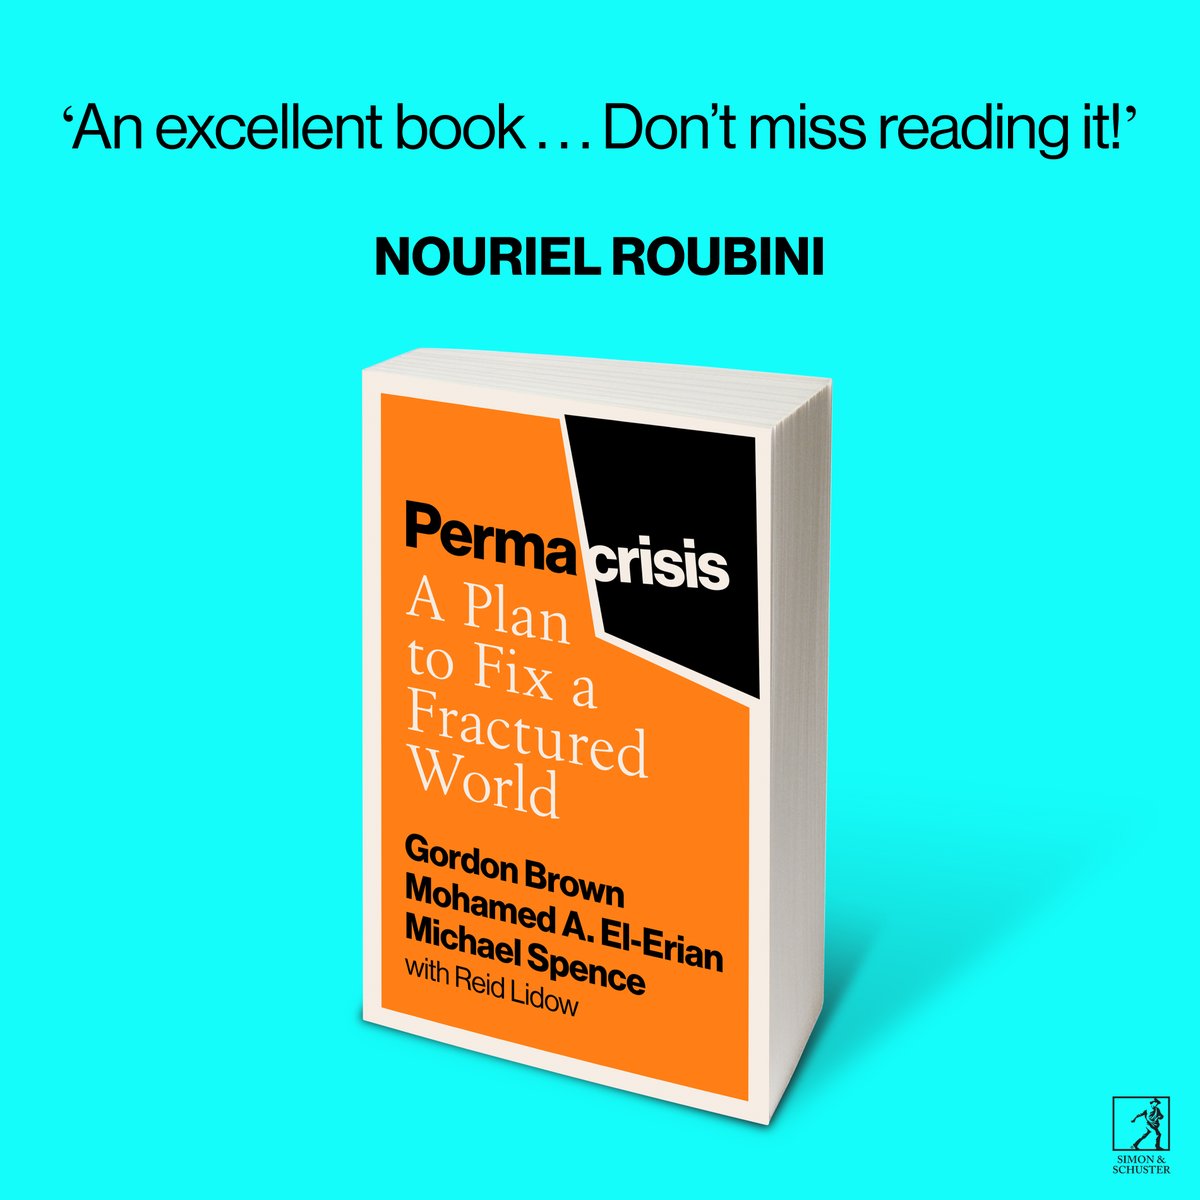 ‘An excellent book... Don’t miss reading it!’ - @Nouriel on #PERMACRISIS, where @GordonBrown, @elerianm, Michael Spence & Reid Lidow examine the broken approaches to growth, the economy and governance - and plot a radical path to fix our fractured world.
simonandschuster.co.uk/books/Permacri…